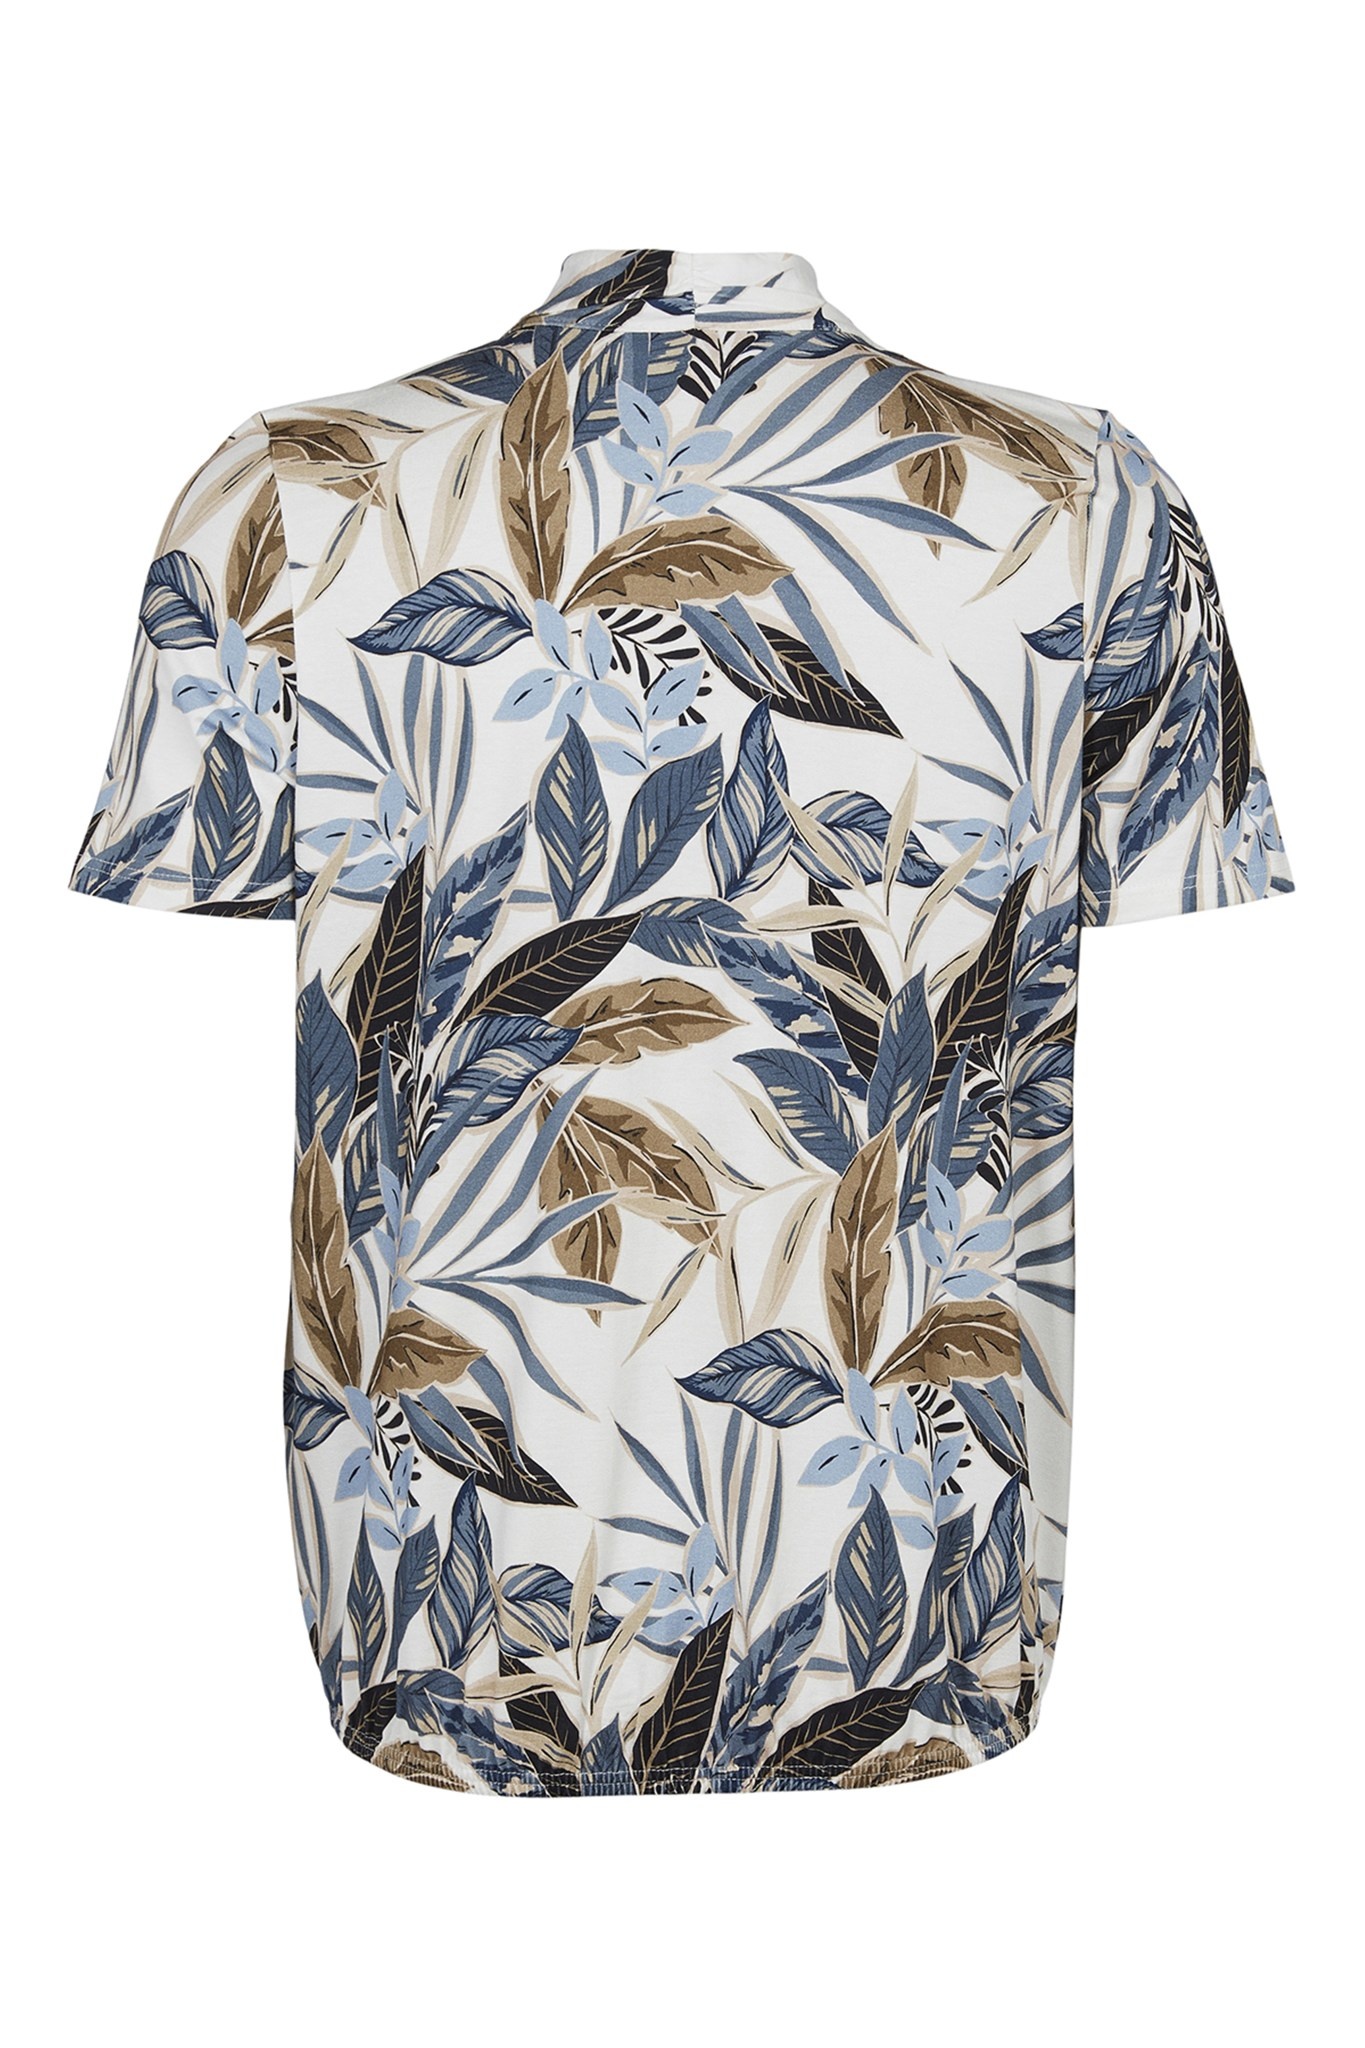 Jersey Tee with Elastic Hem - Neutral Blue Leaves